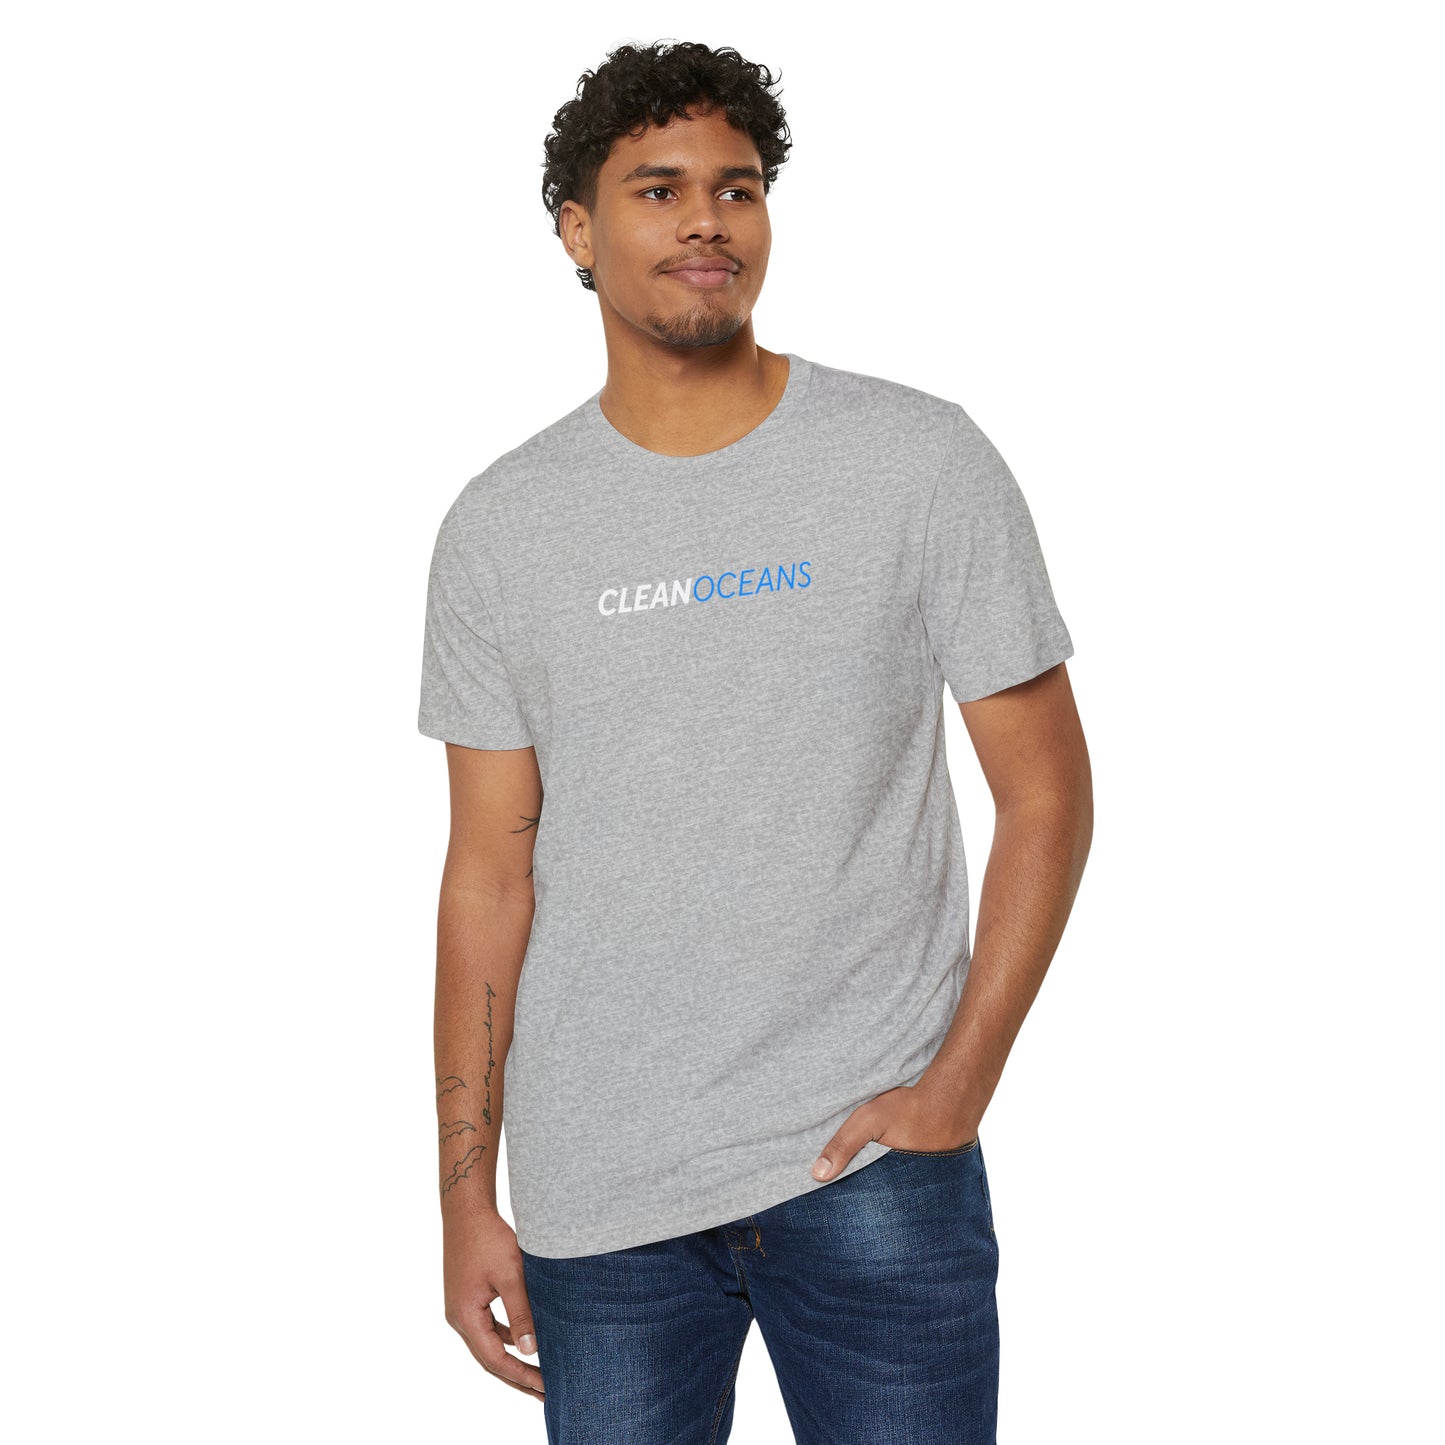 CleanOceans Unisex Recycled Organic T-Shirt